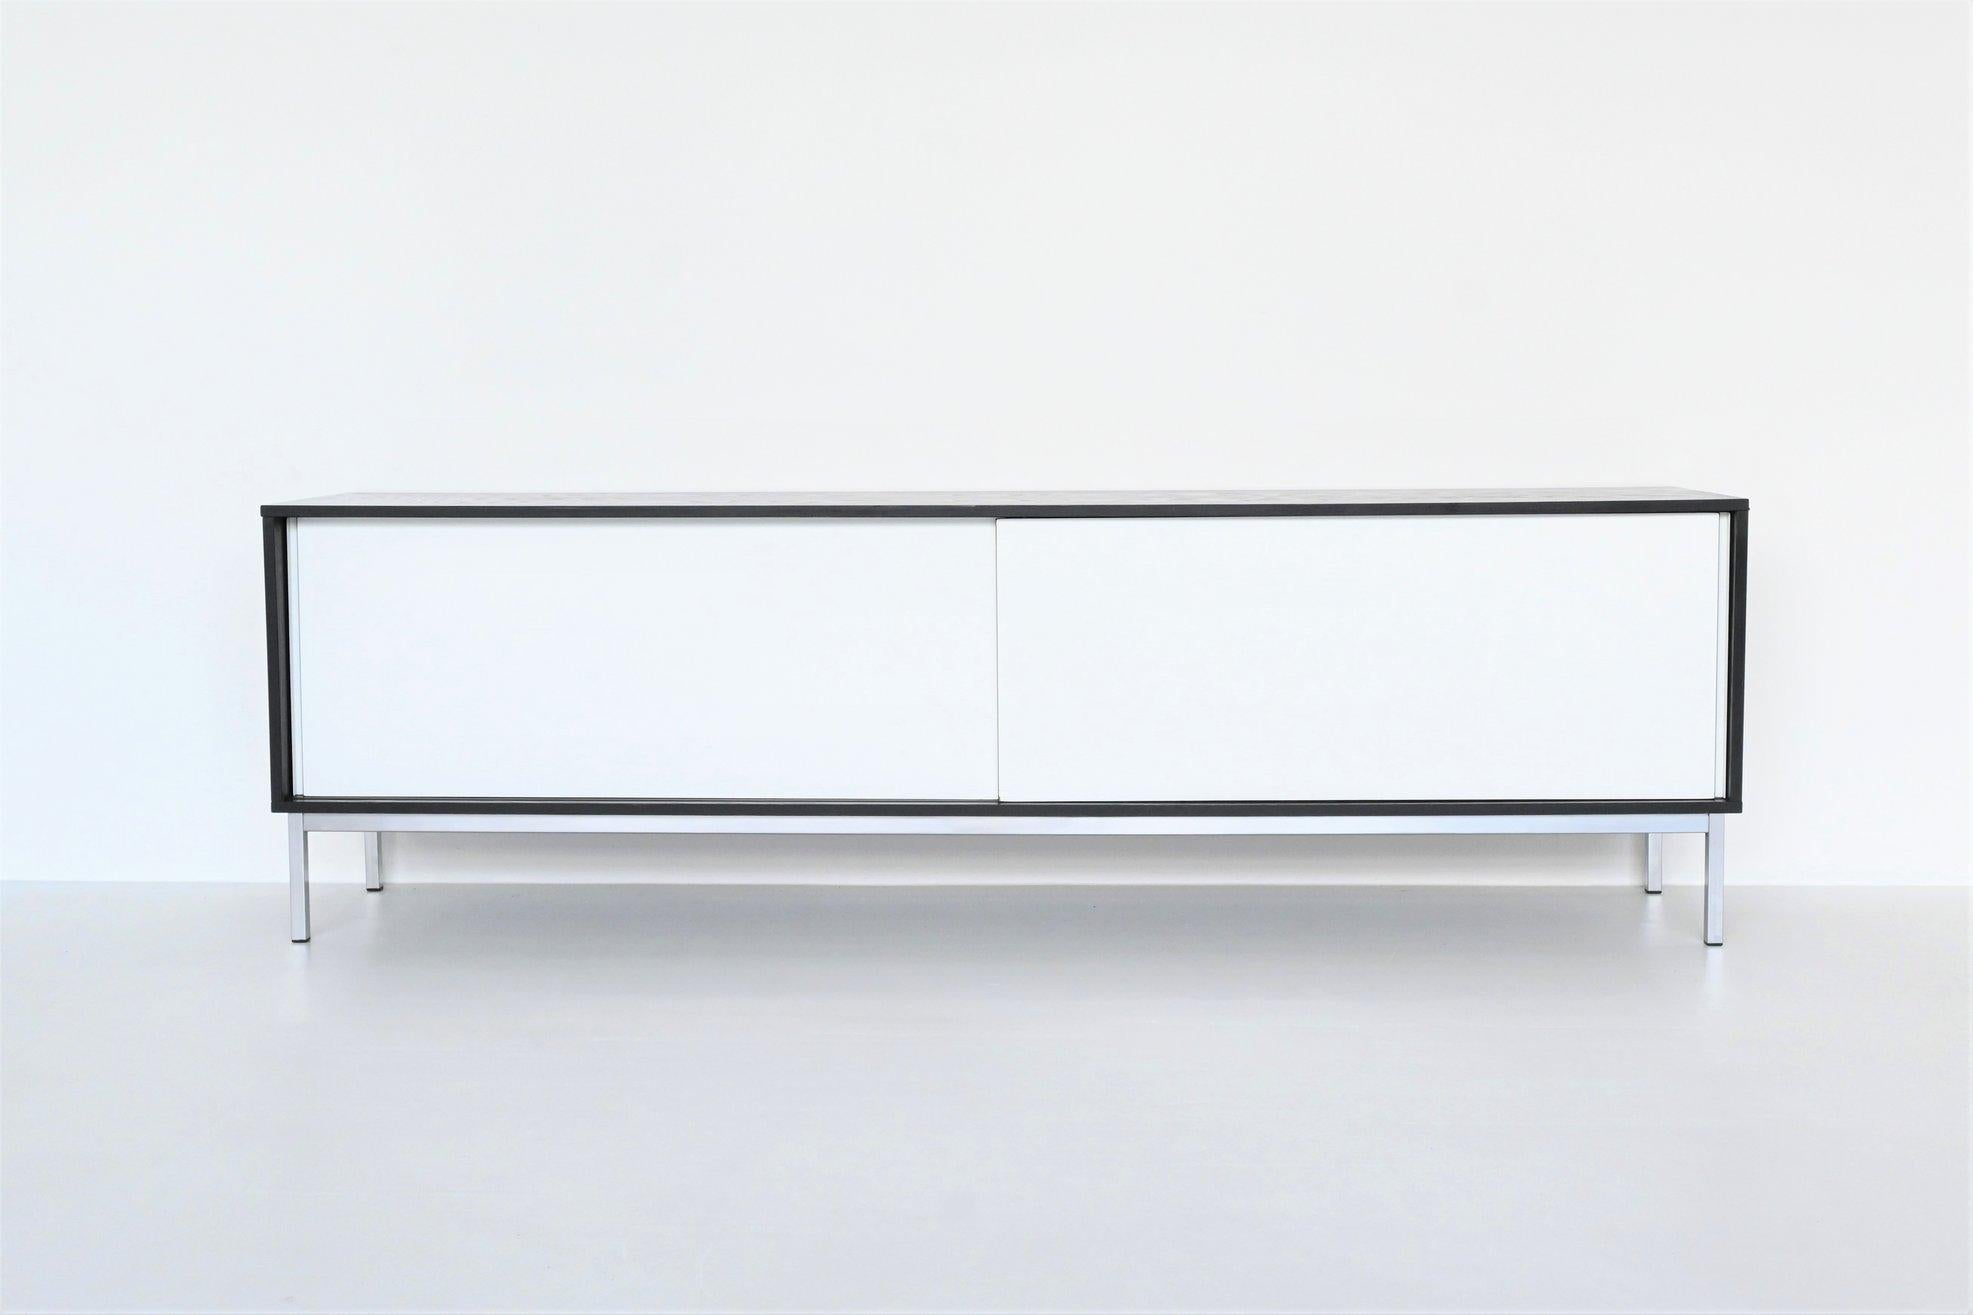 Beautiful minimalistic and modernist sideboard model KW85 designed by Martin Visser and manufactured by ‘t Spectrum Bergeijk, The Netherlands 1965. This longest version sideboard has a black ebonized wenge wooden cabinet with two white laminated